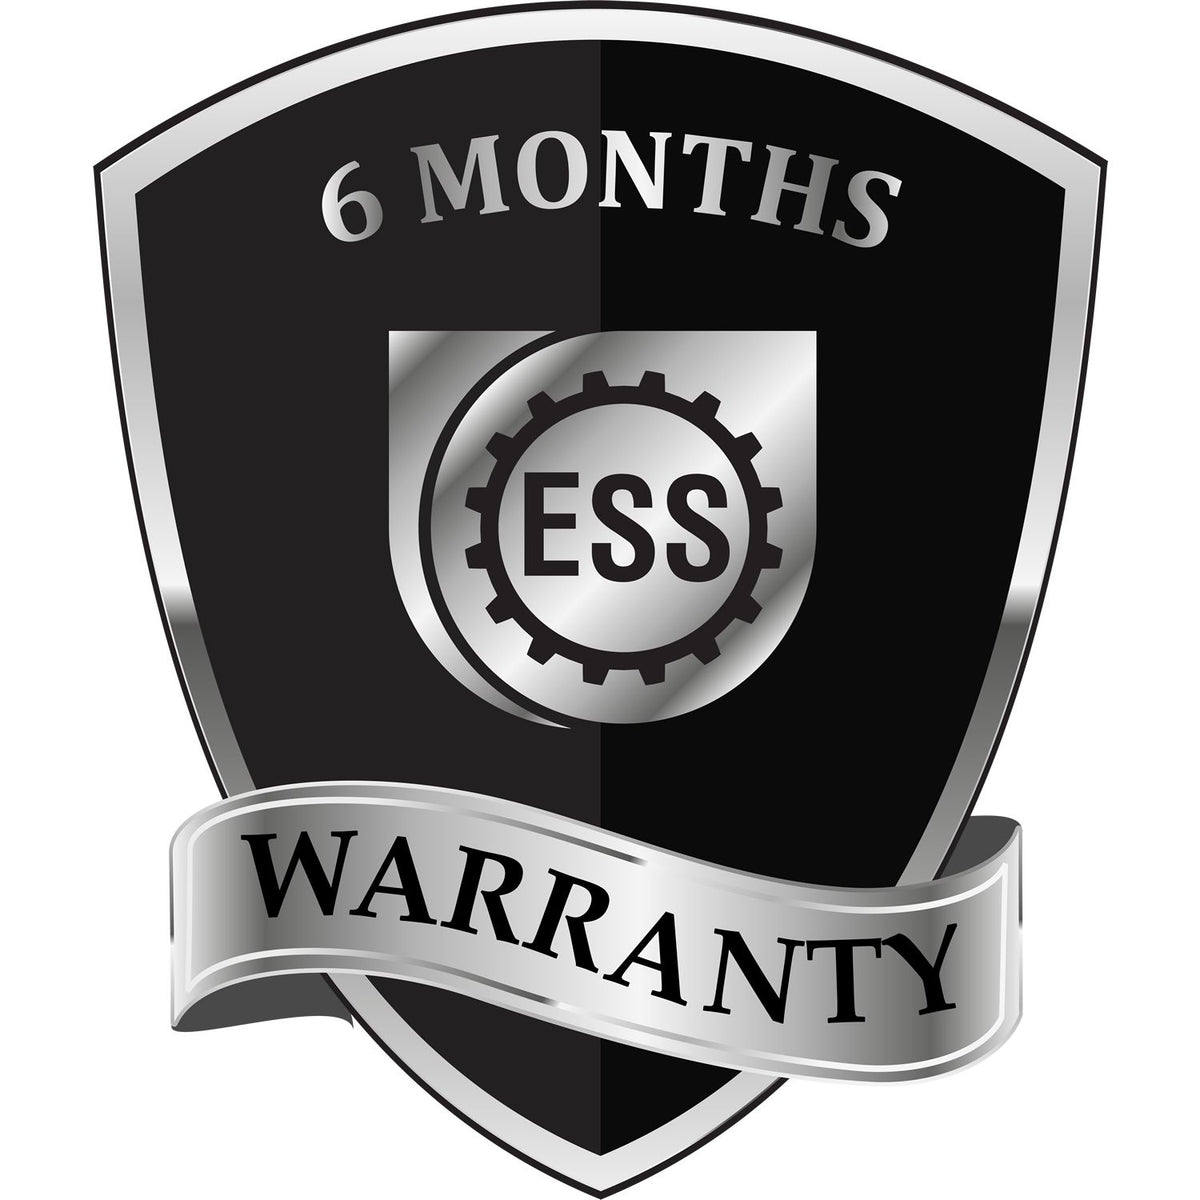 A badge or emblem showing a warranty icon for the Self-Inking Washington PE Stamp